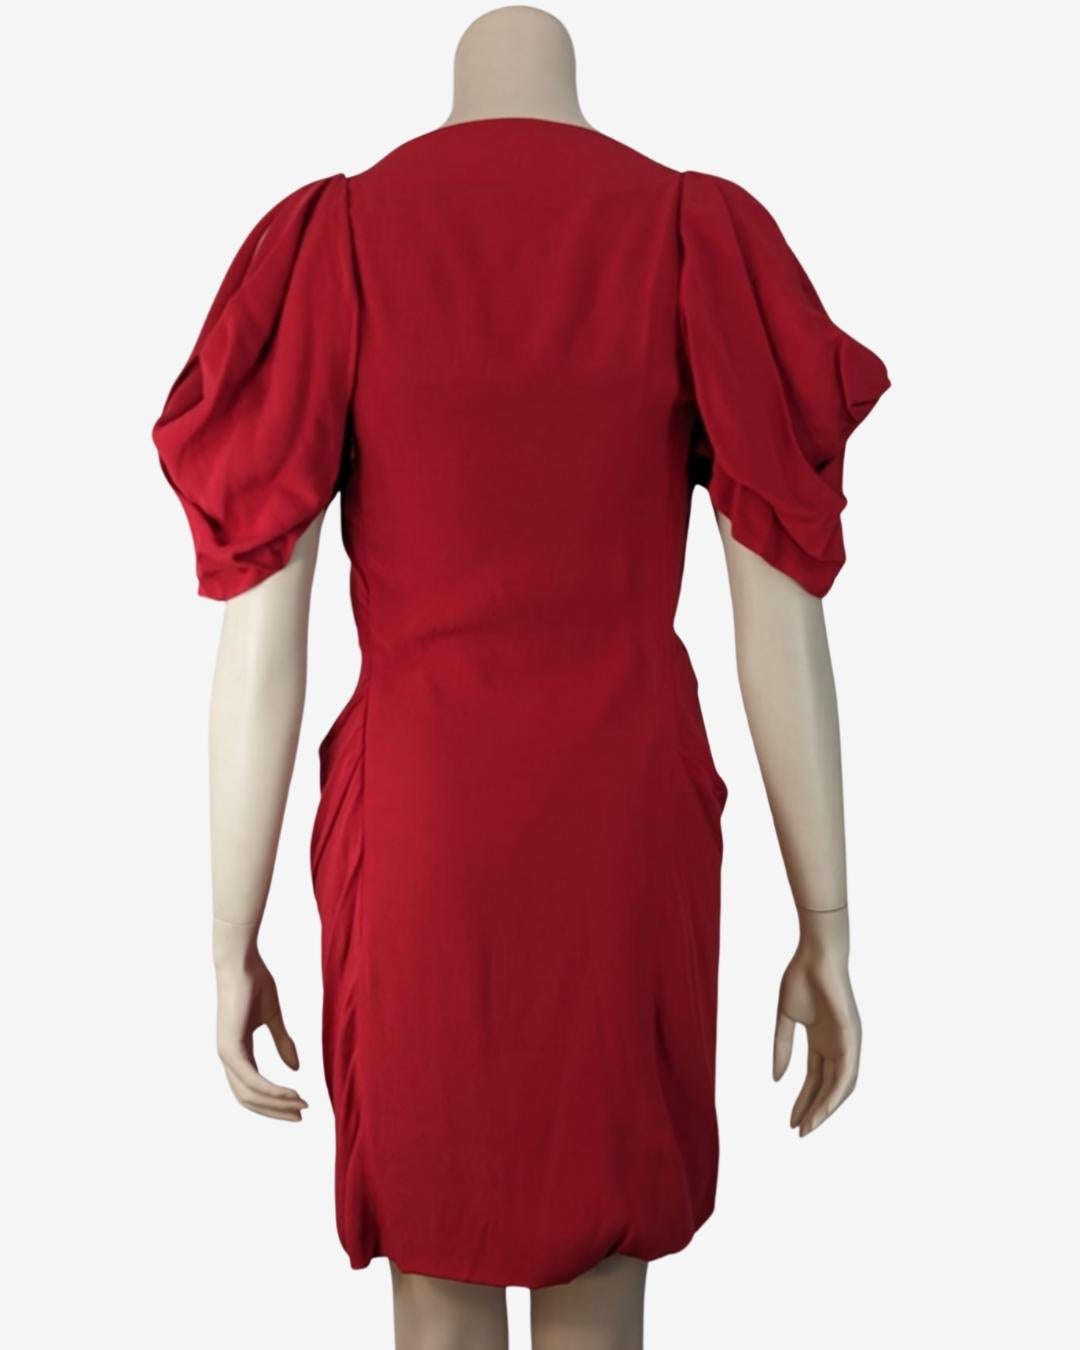 Vivienne Westwood Opened Sleeves Cherry Red Mini dress For Sale 2